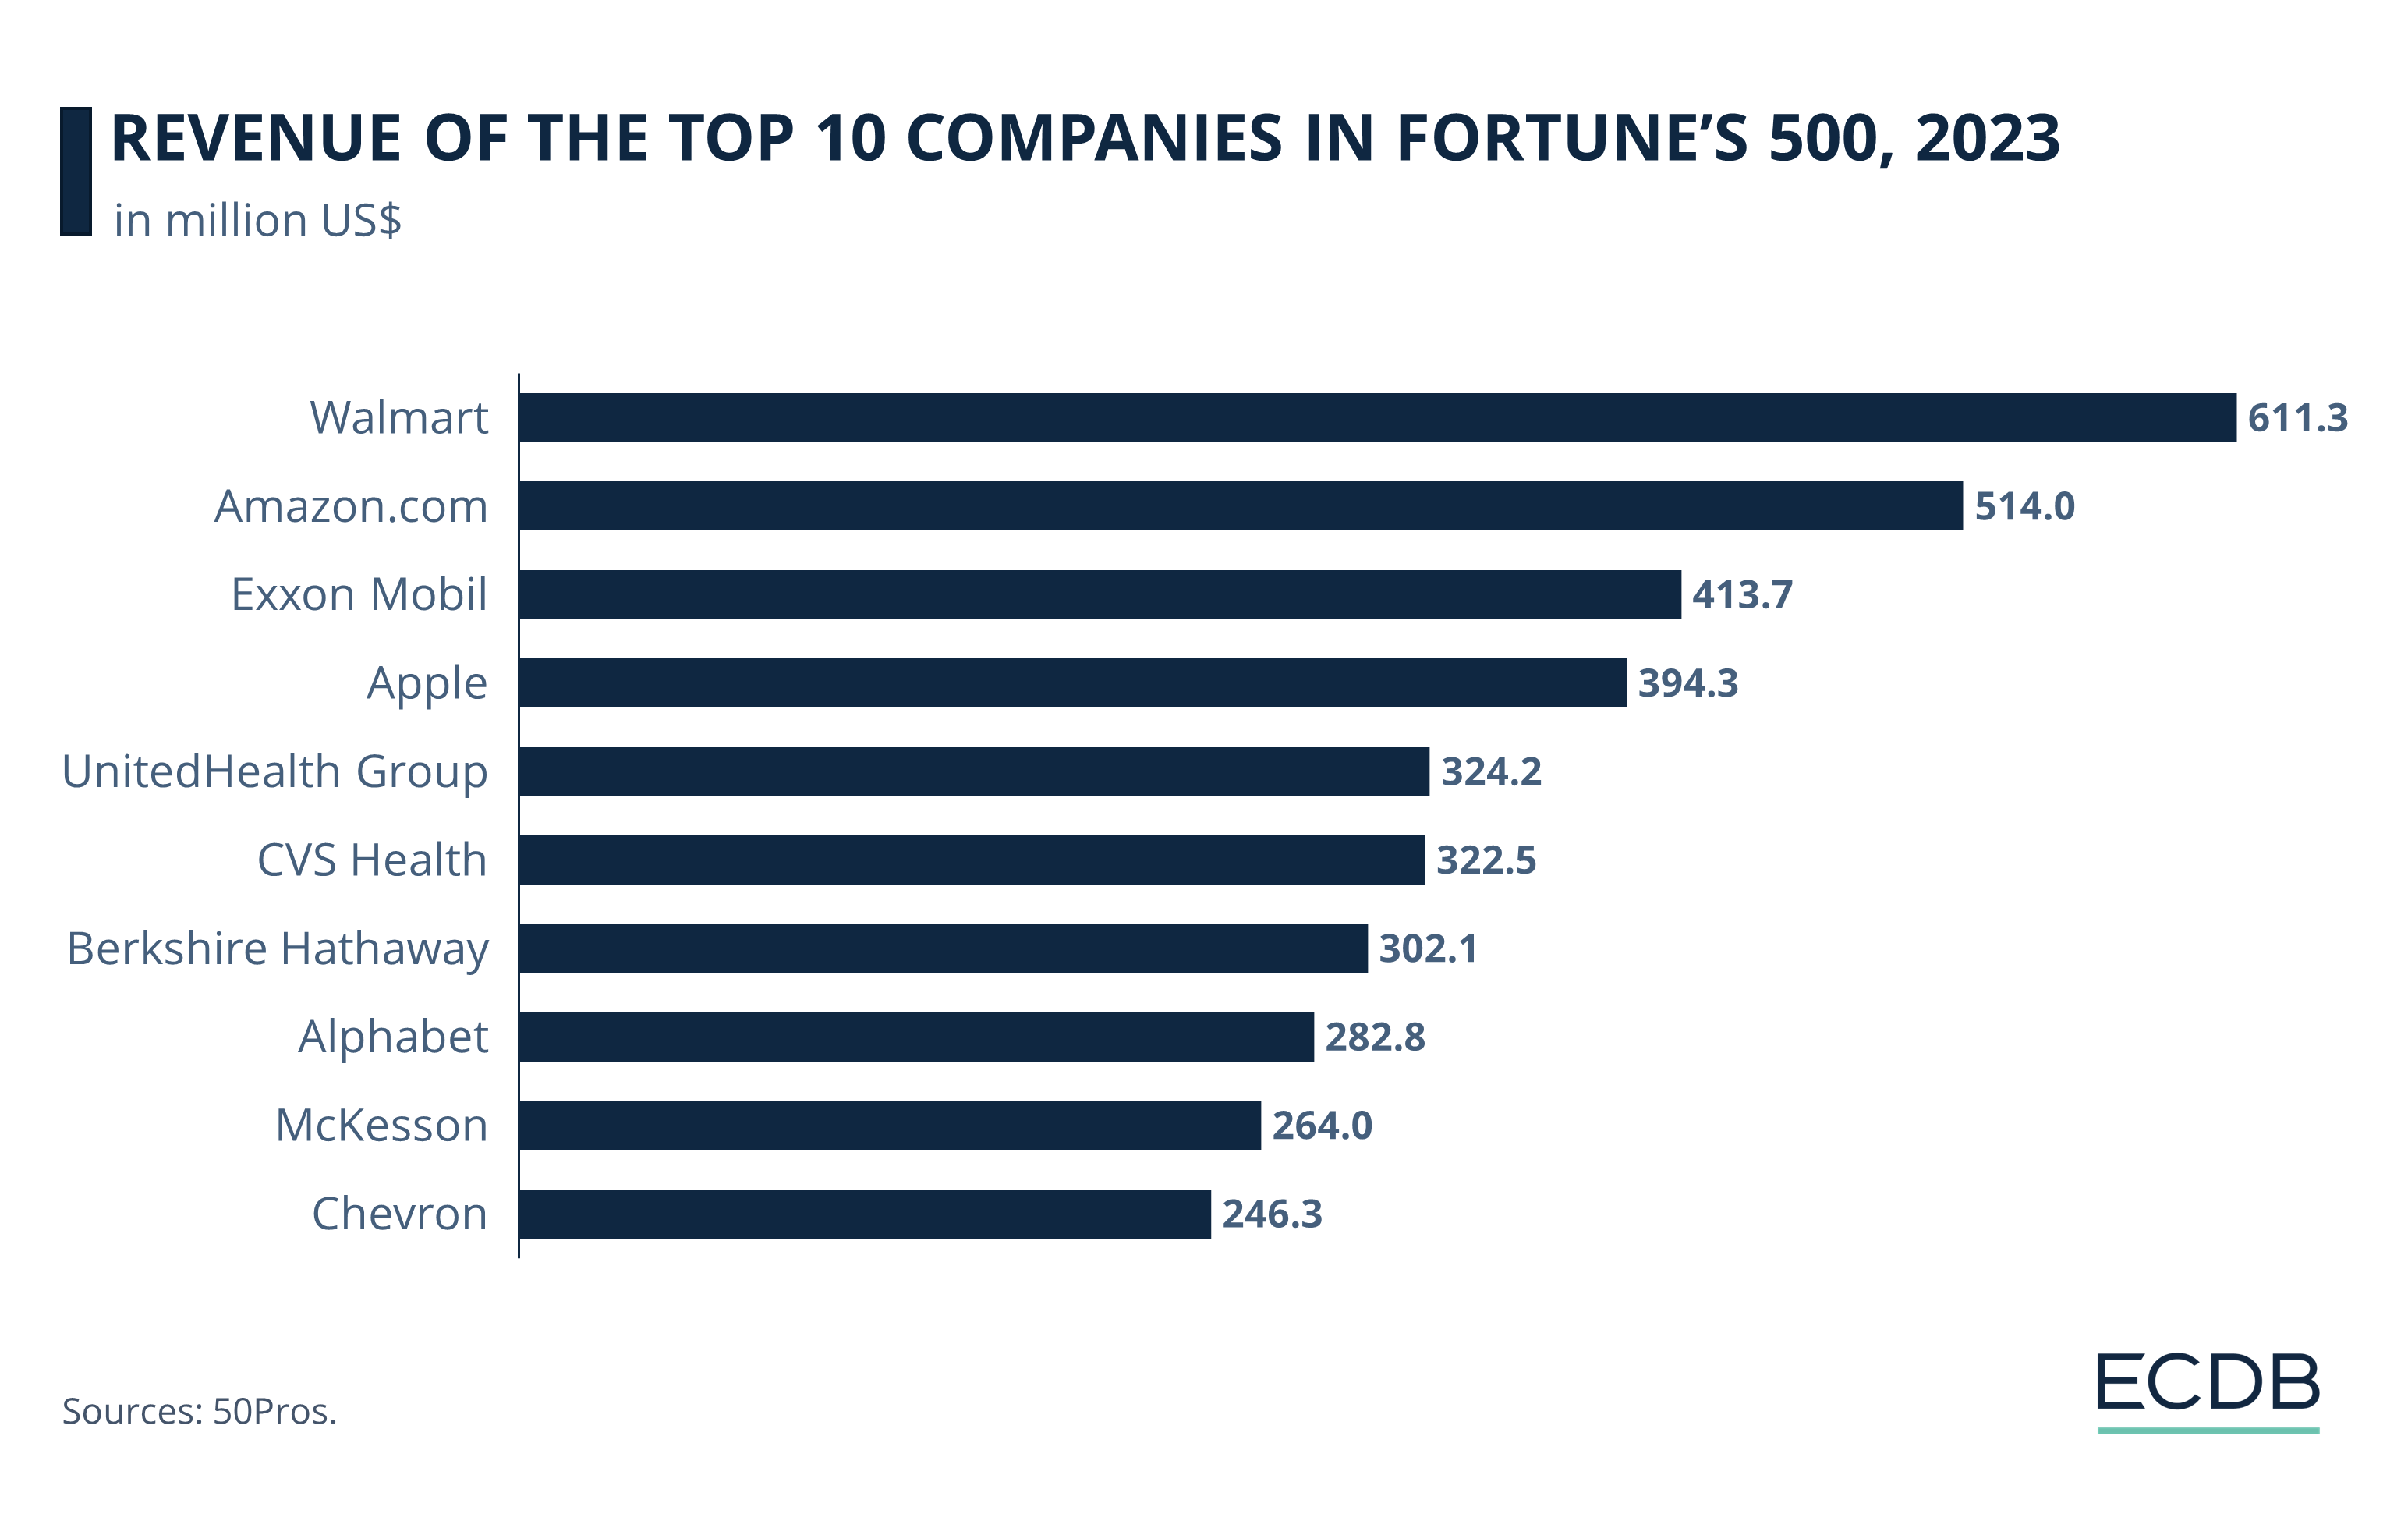 Revenue of the Top 10 Companies in Fortune’s 500, 2023